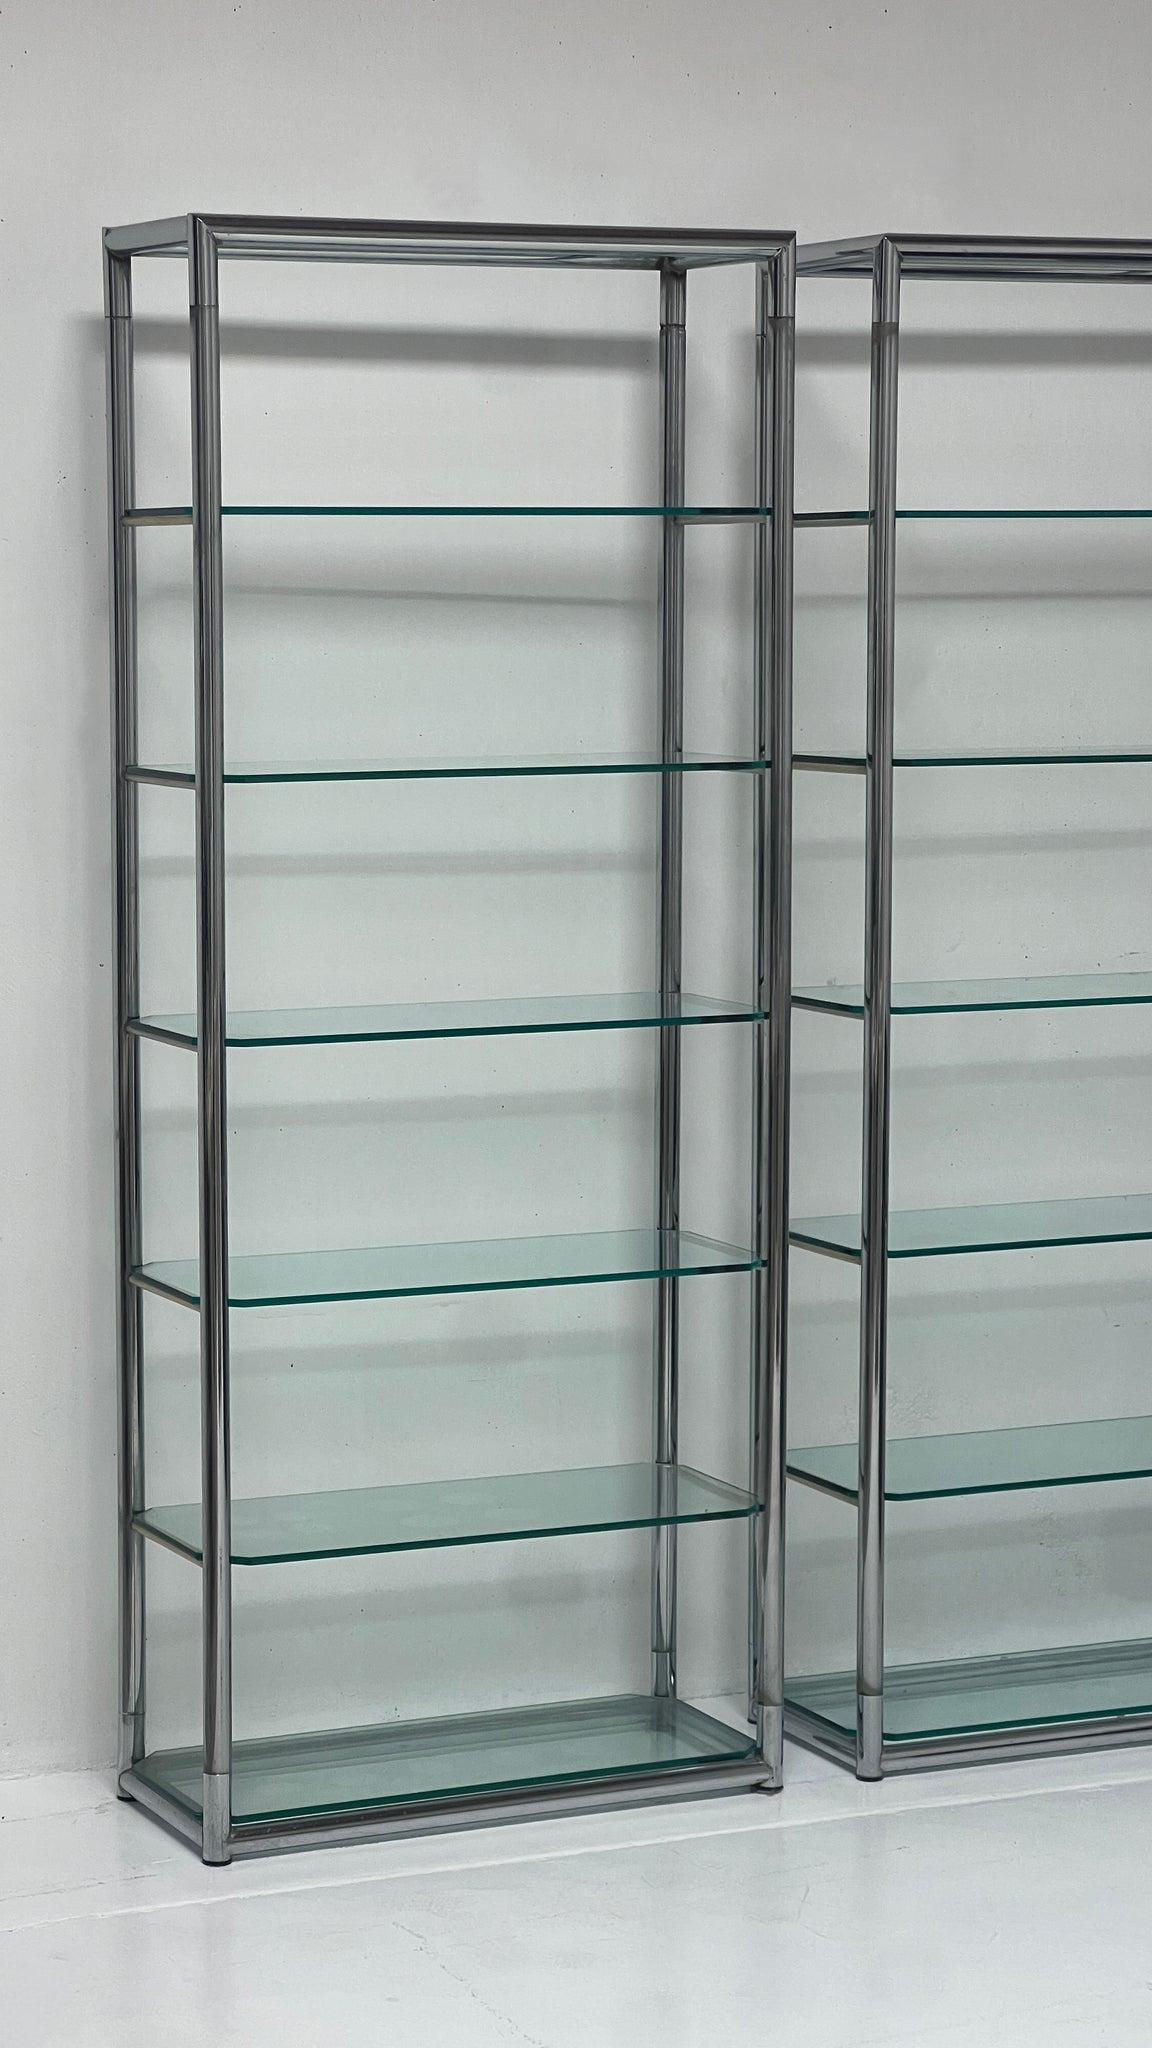 1980s Chrome Etagere Shelving Unit with Glass Shelves  In Fair Condition For Sale In South San Francisco, CA